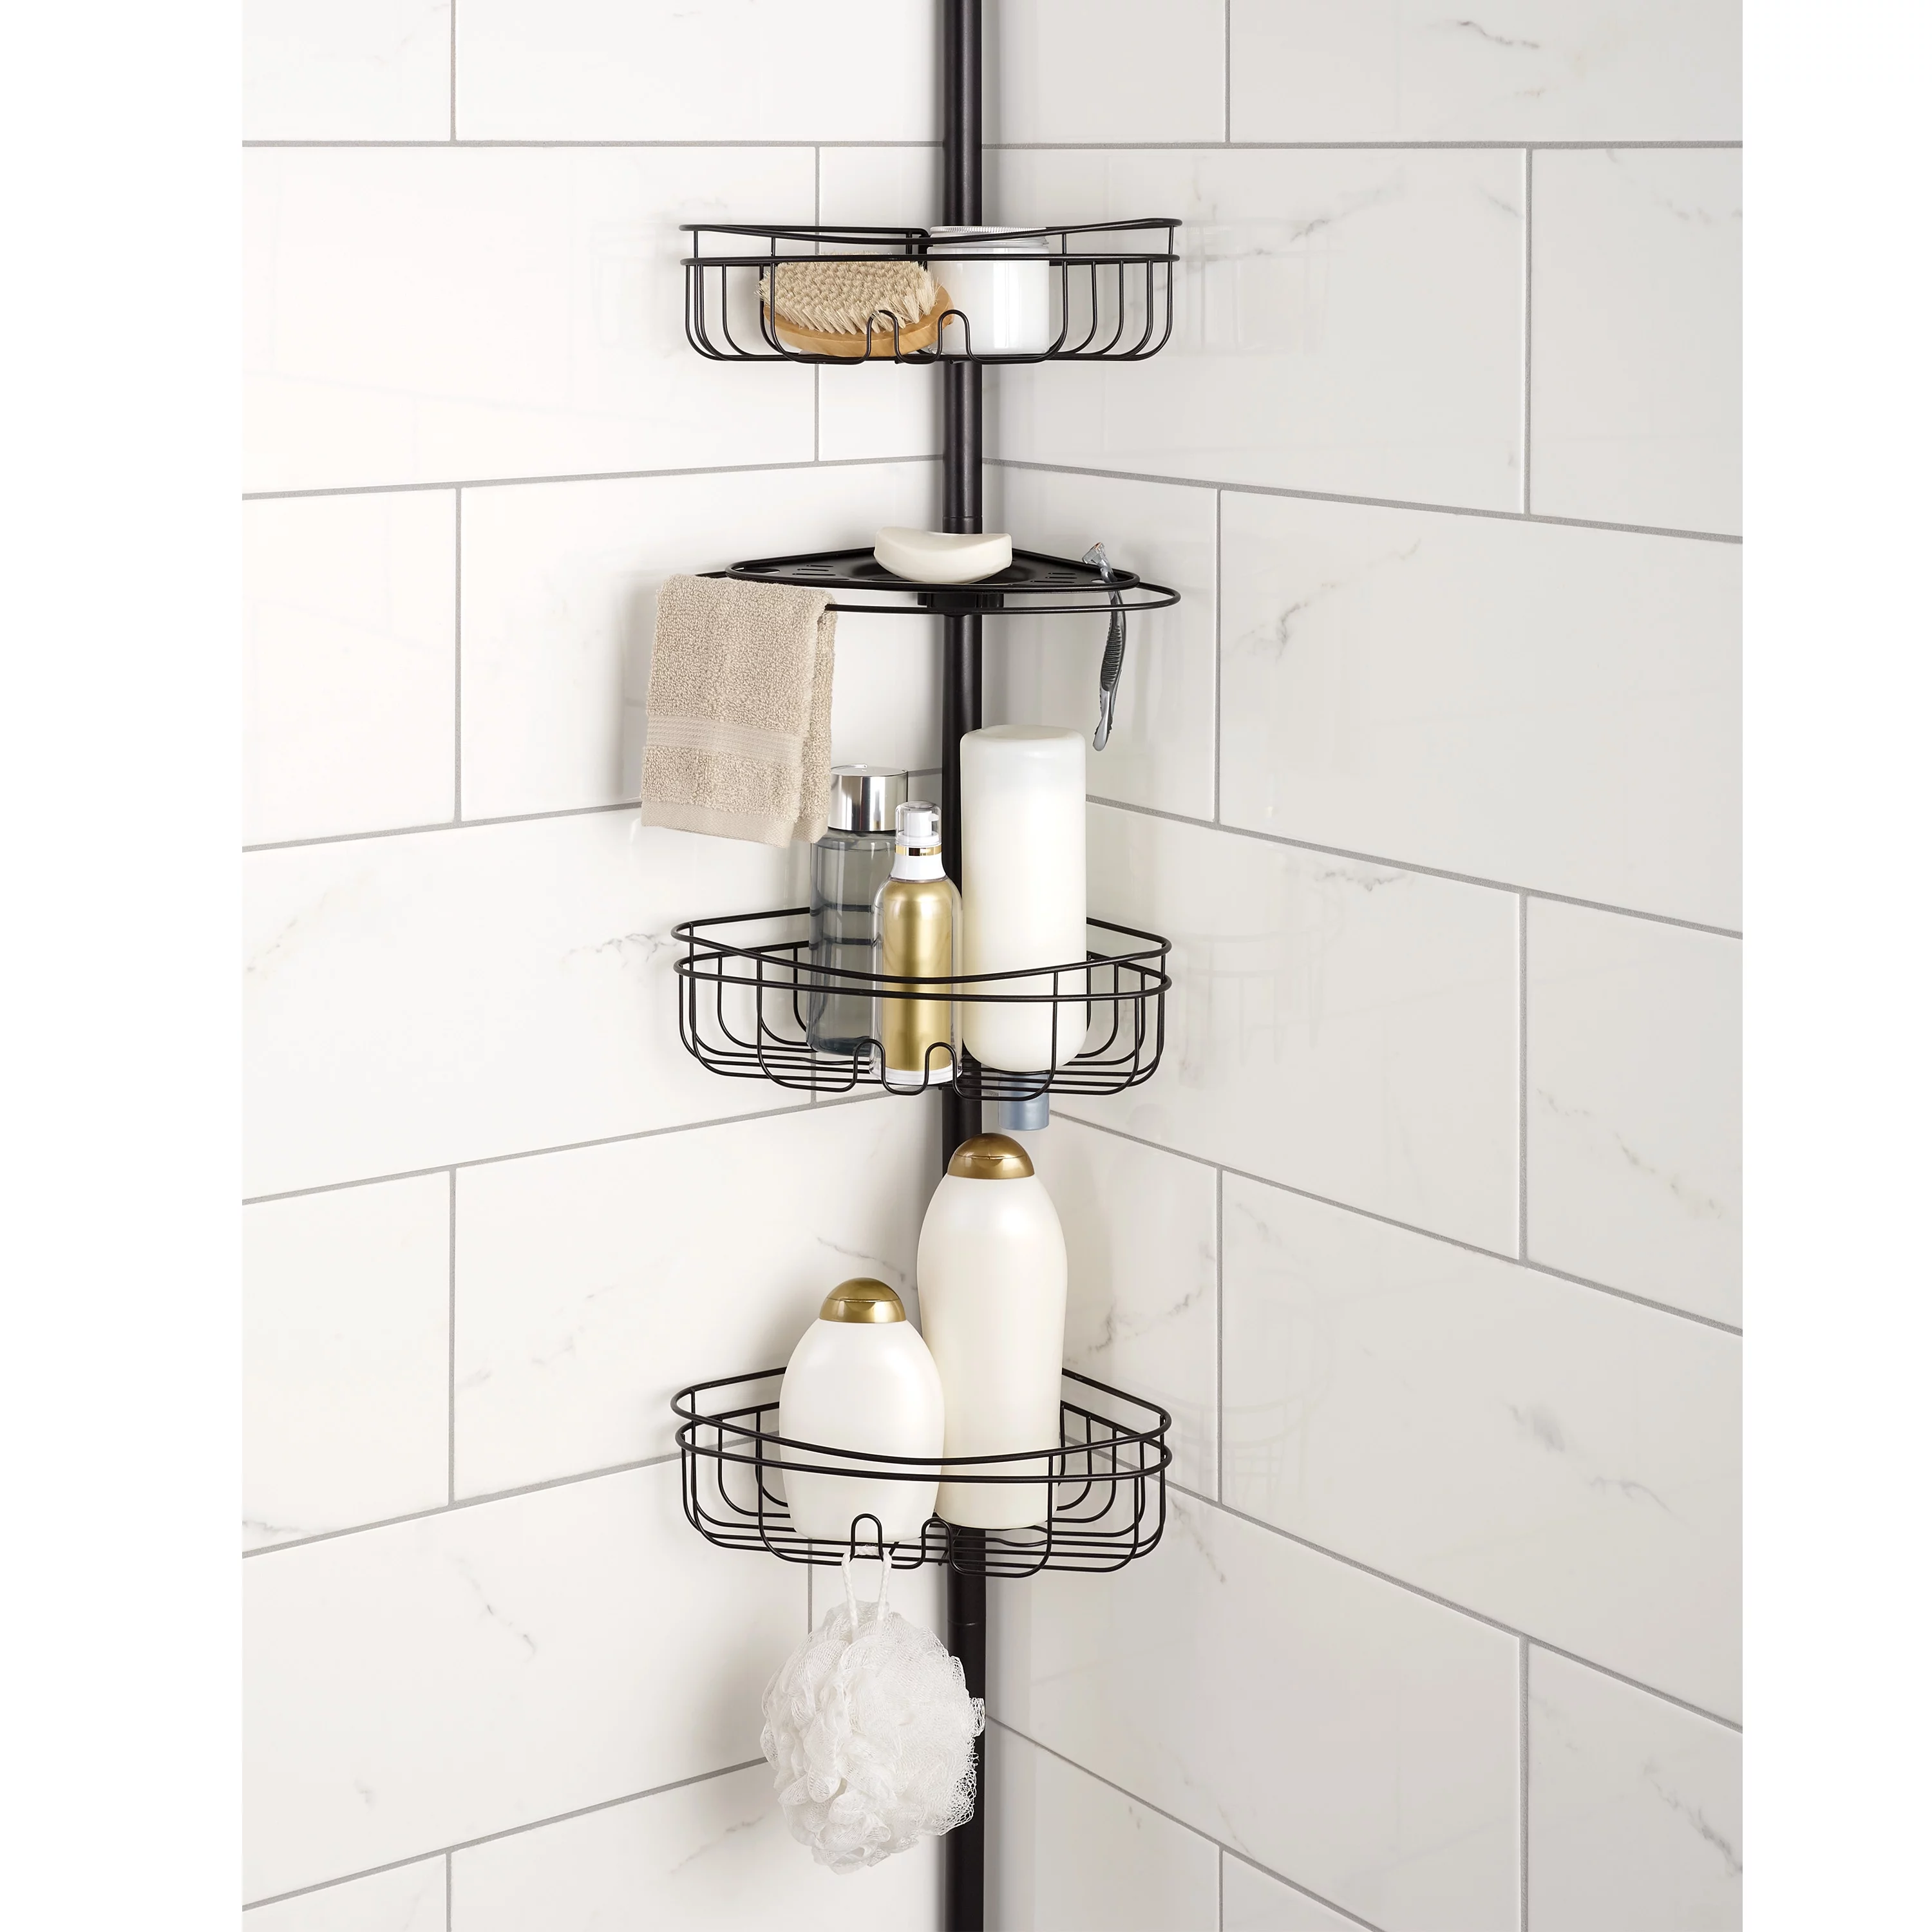 https://citizenside.com/wp-content/uploads/2023/10/how-to-keep-shower-caddy-from-falling-1697991731.jpg